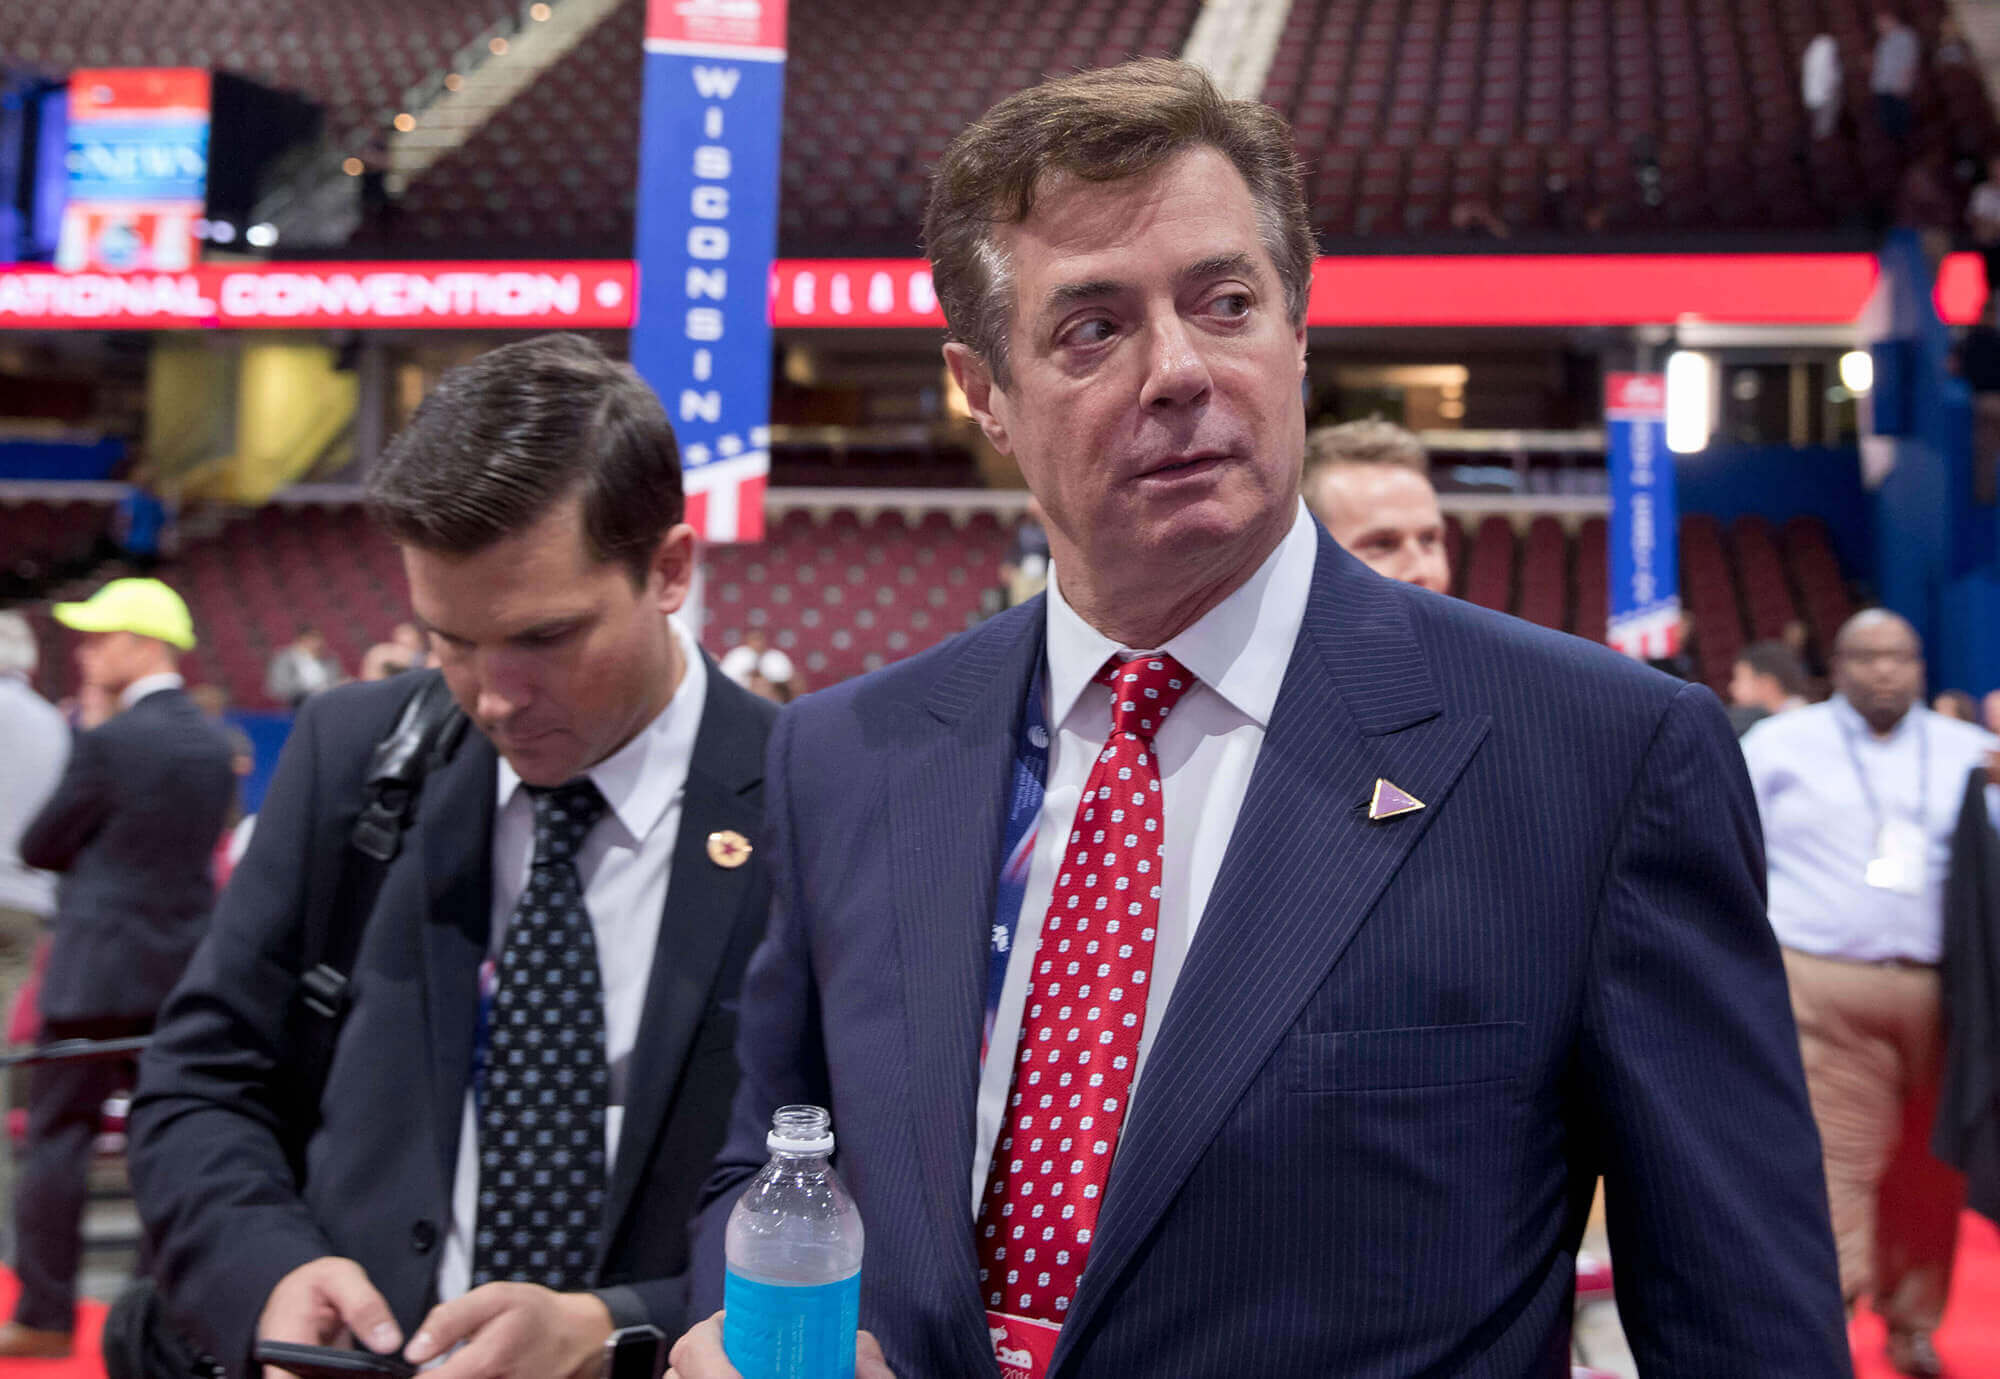 Image of Paul Manafort at Republican Convention in Cleveland